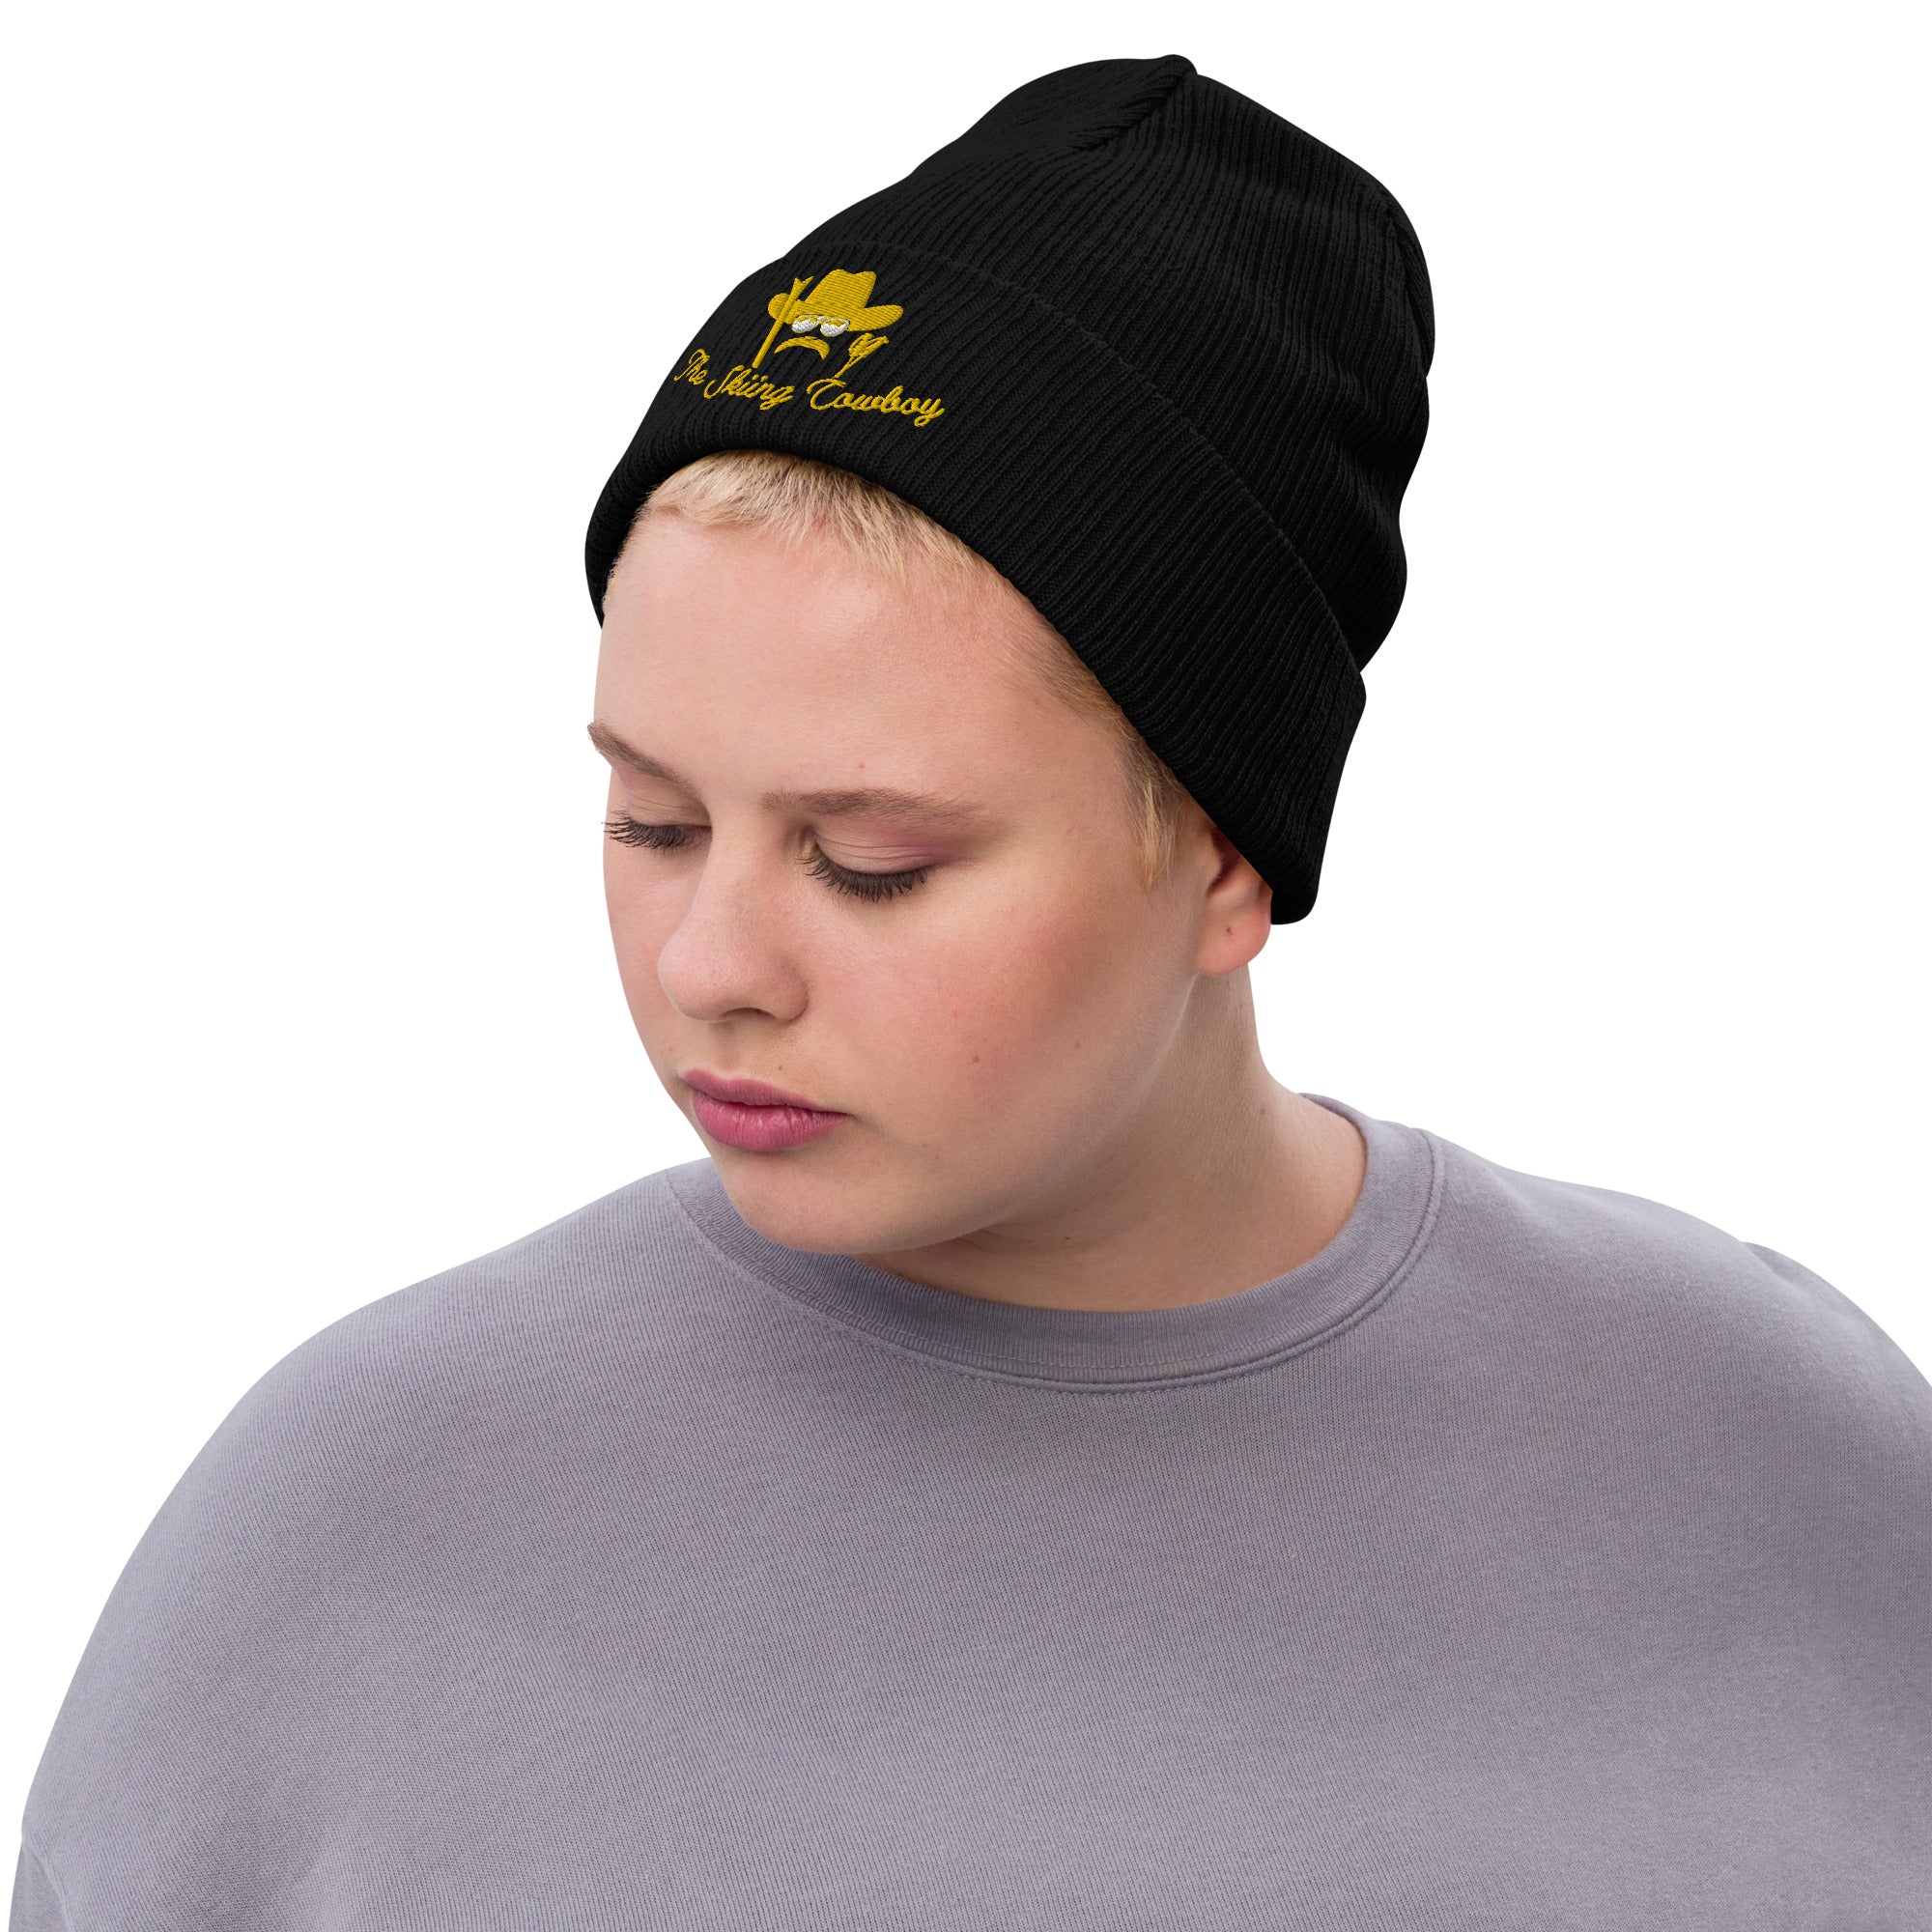 Eco ribbed knit beanie The Skiing Cowboy Gold